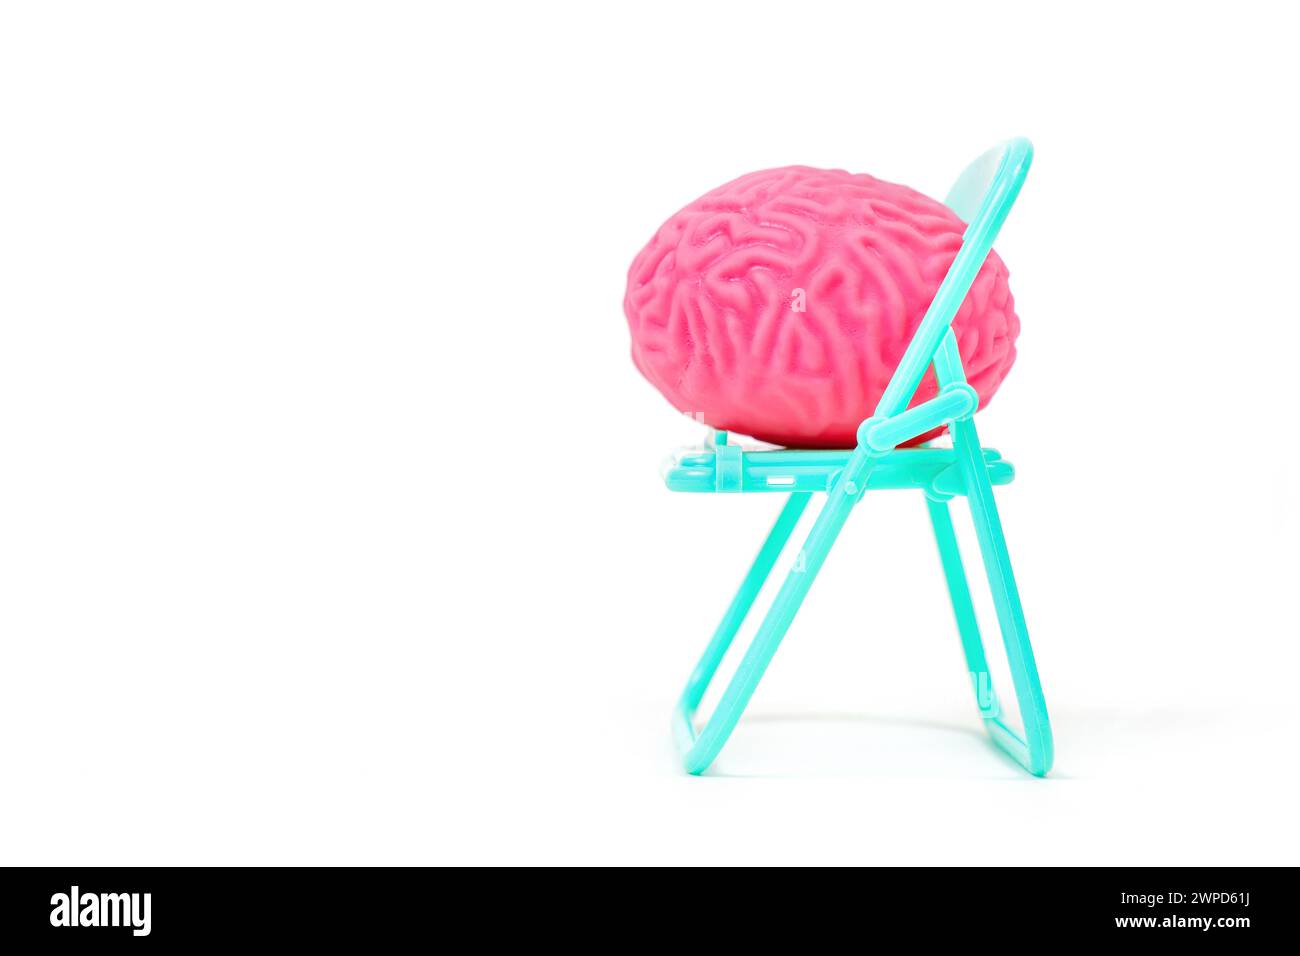 Soft human brain model comfortably seated on a folding teal chair isolated on white background with copy space. Creative medical check-up concept. Stock Photo